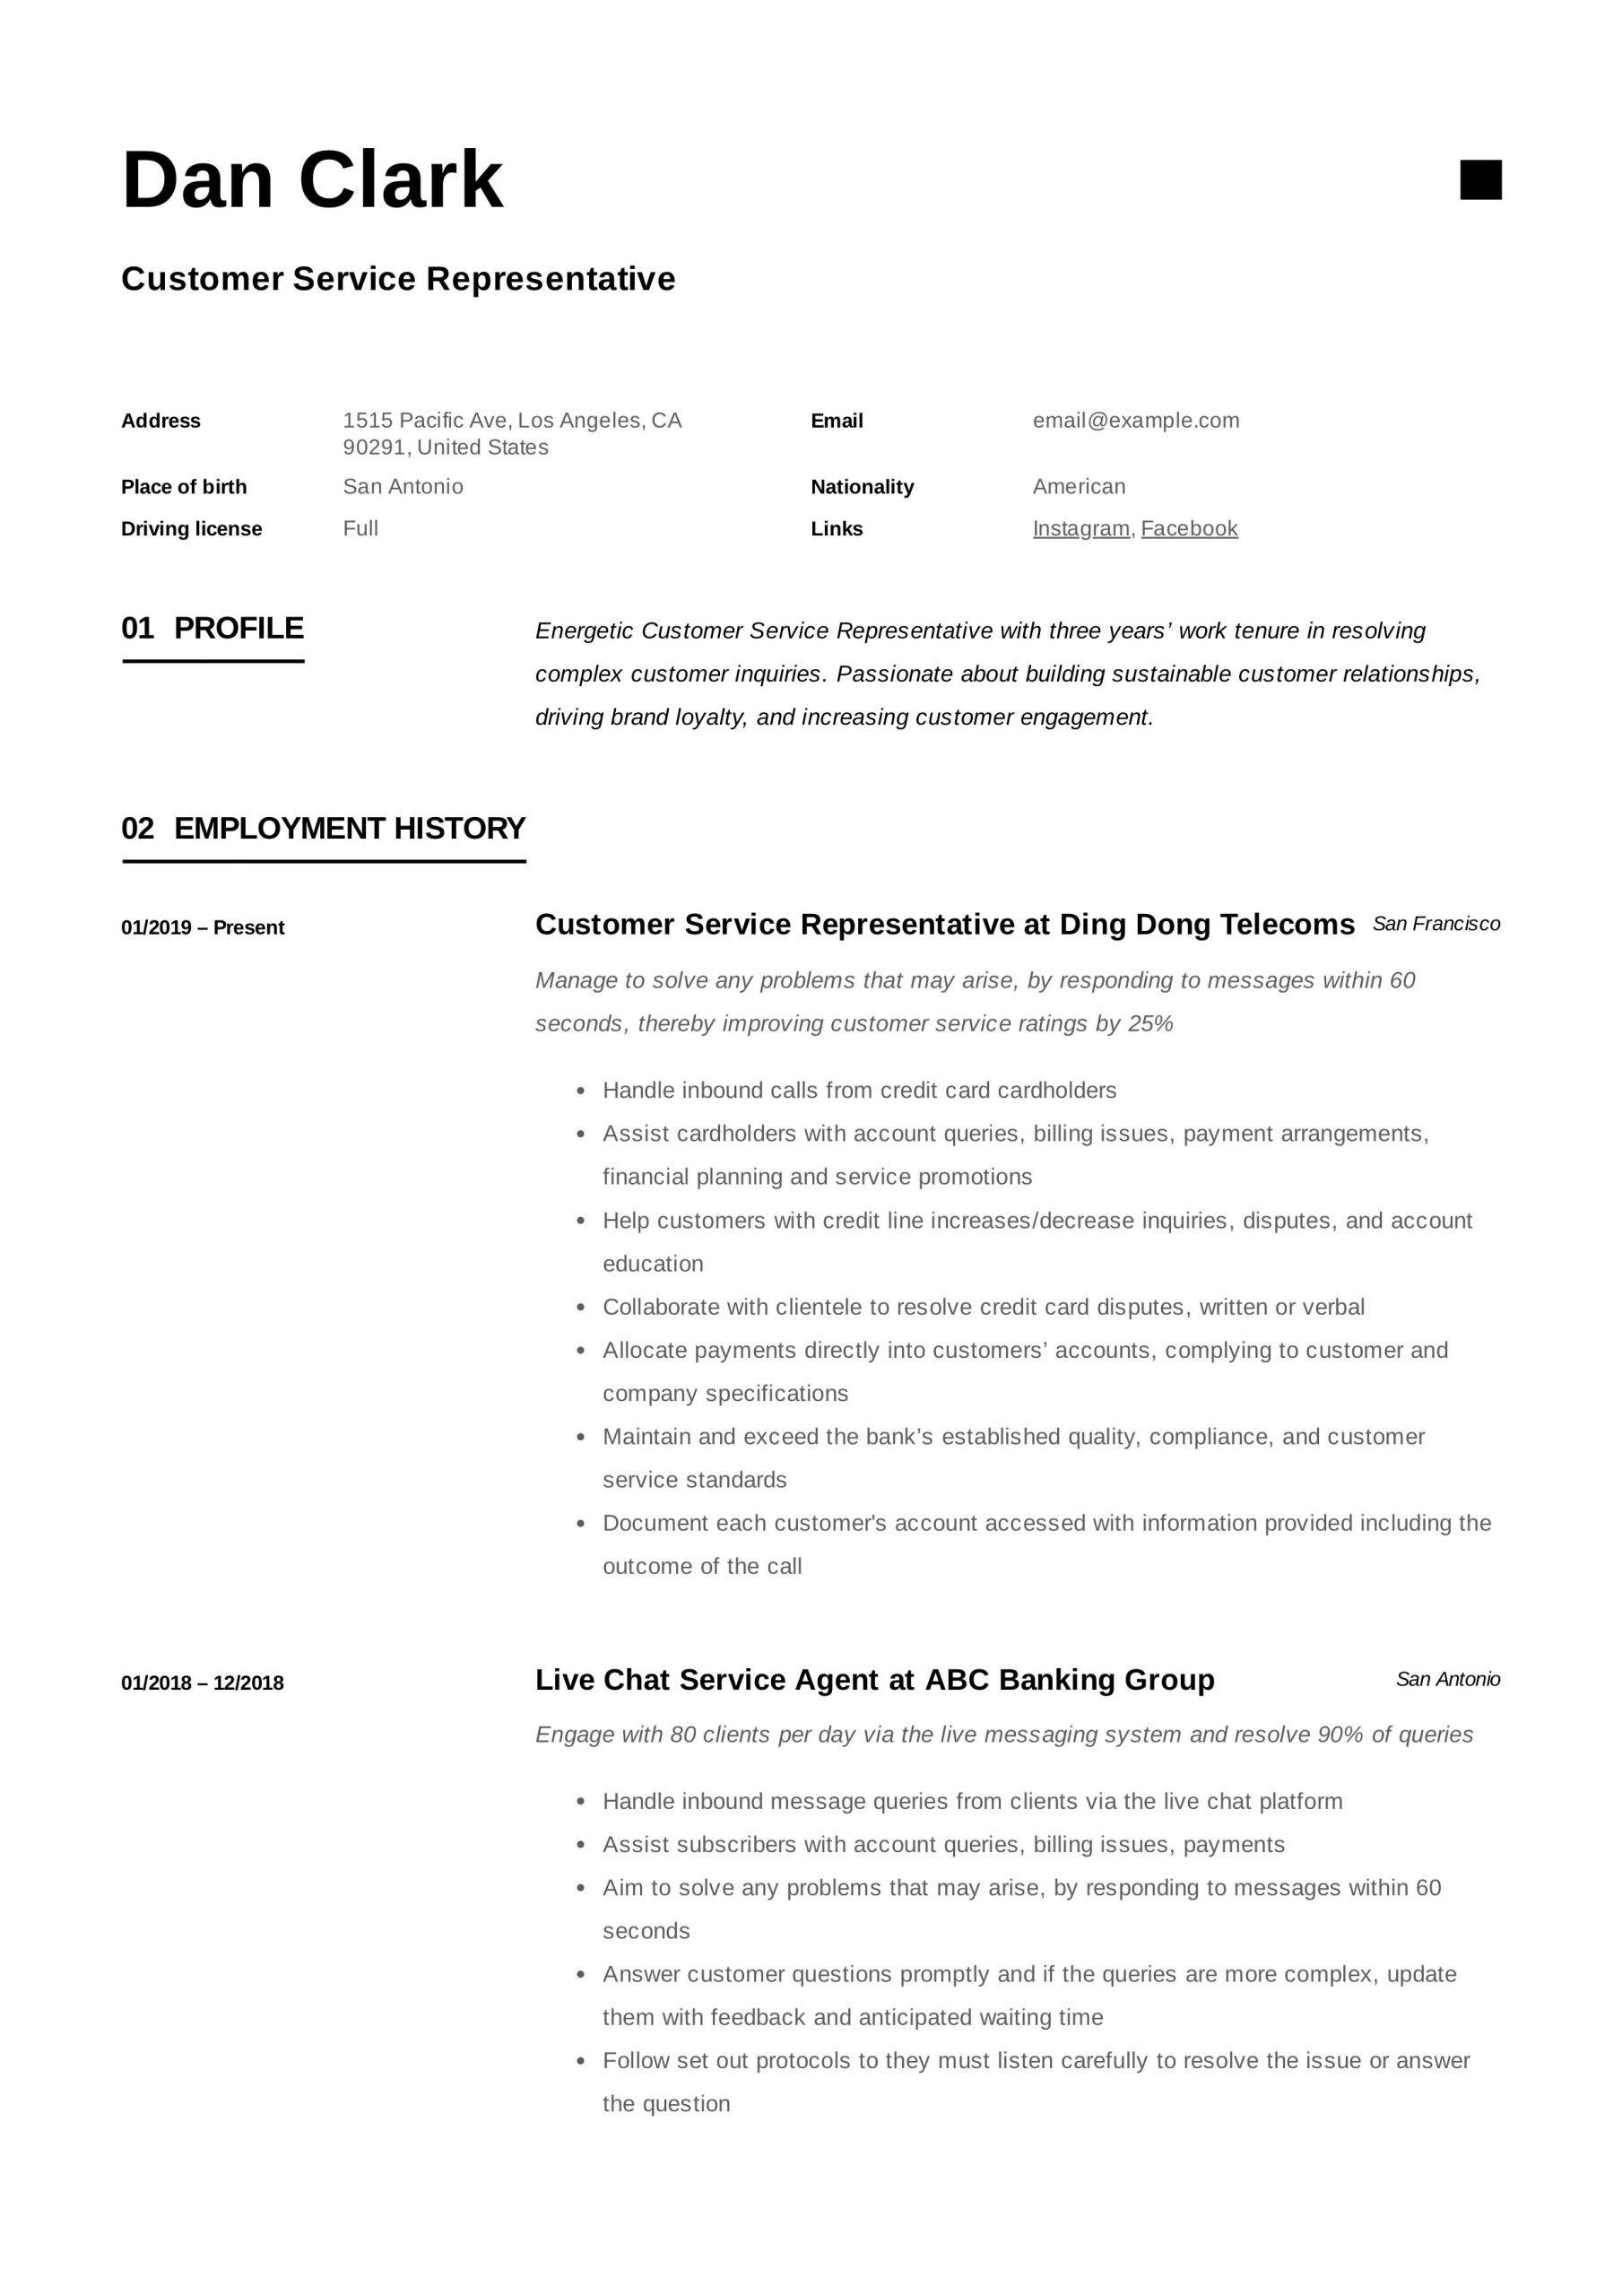 Sample Resume for Customer Service Jobs How to: Customer Service Representative Resume &   12 Pdf Samples